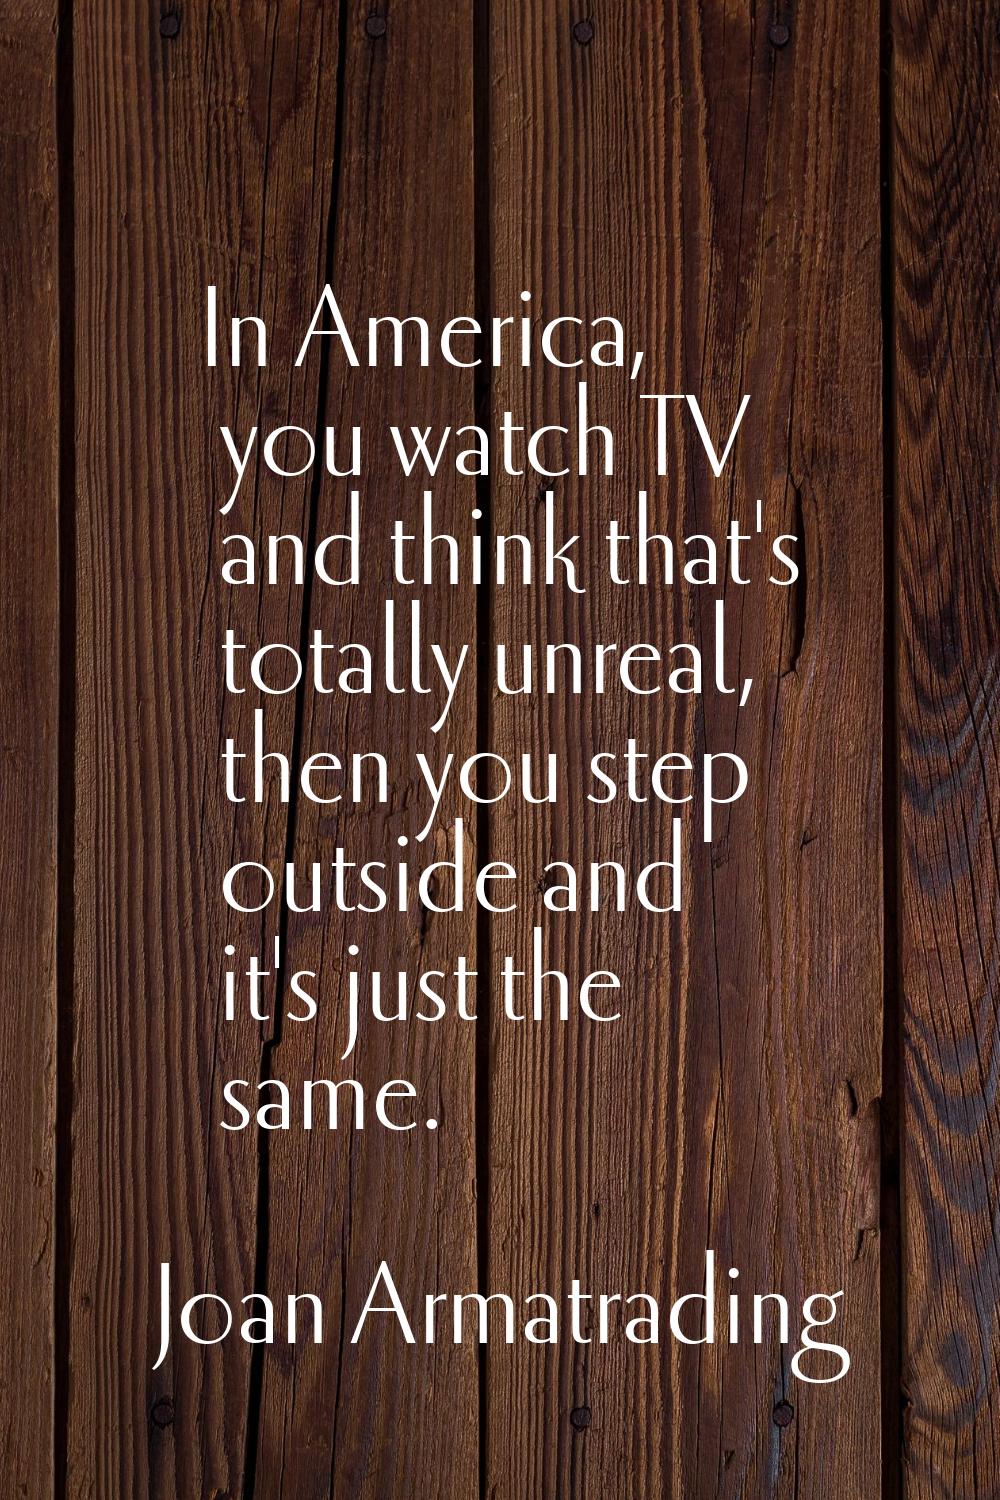 In America, you watch TV and think that's totally unreal, then you step outside and it's just the s